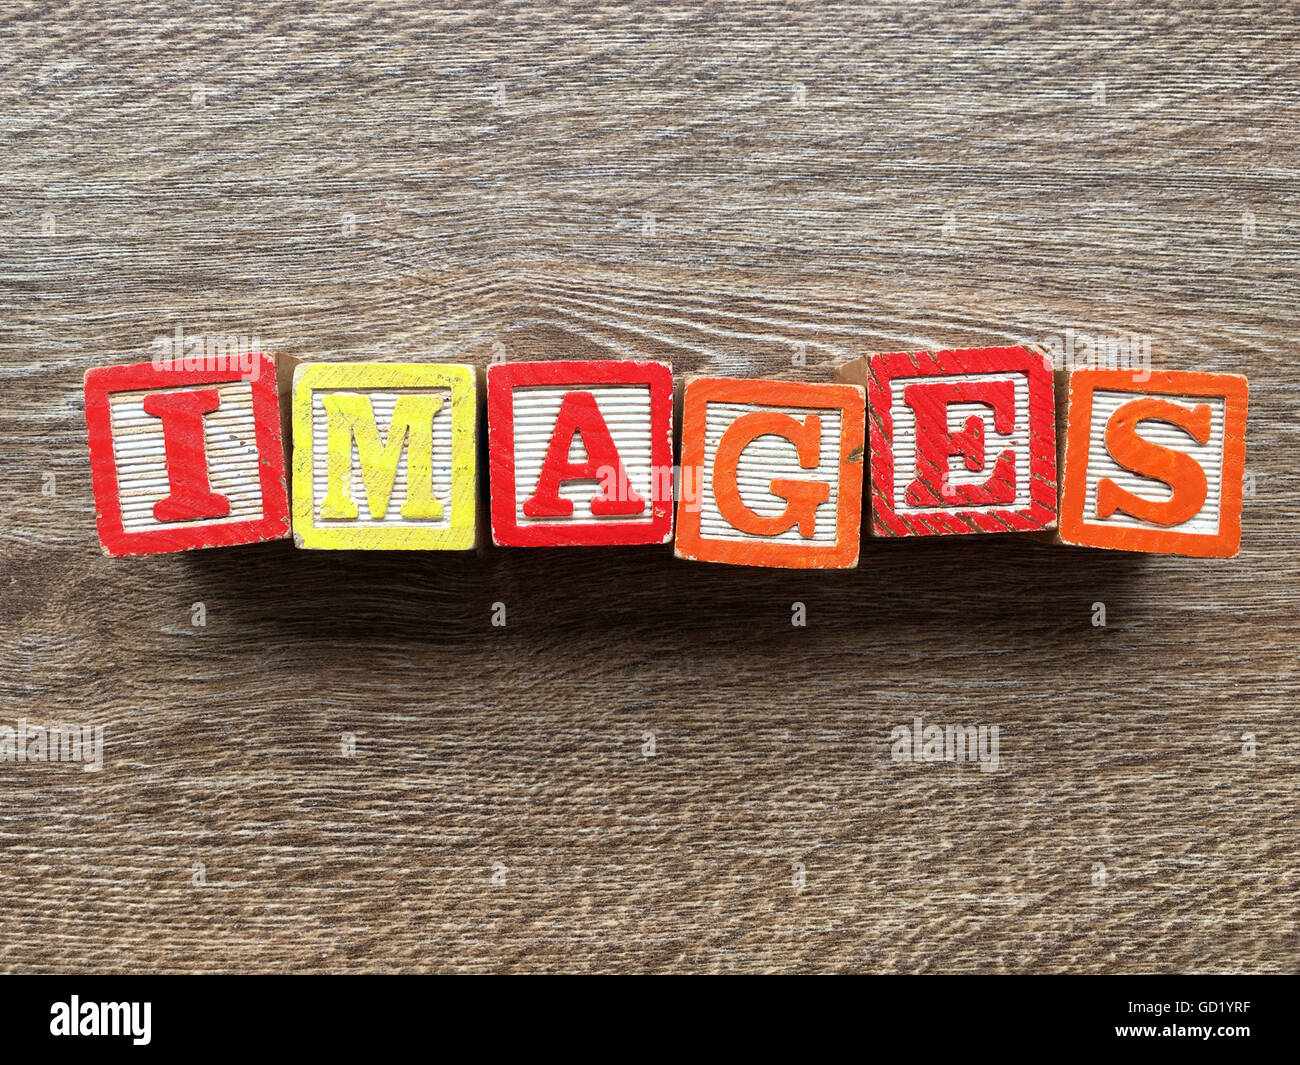 IMAGES written with wood block letter toys Stock Photo